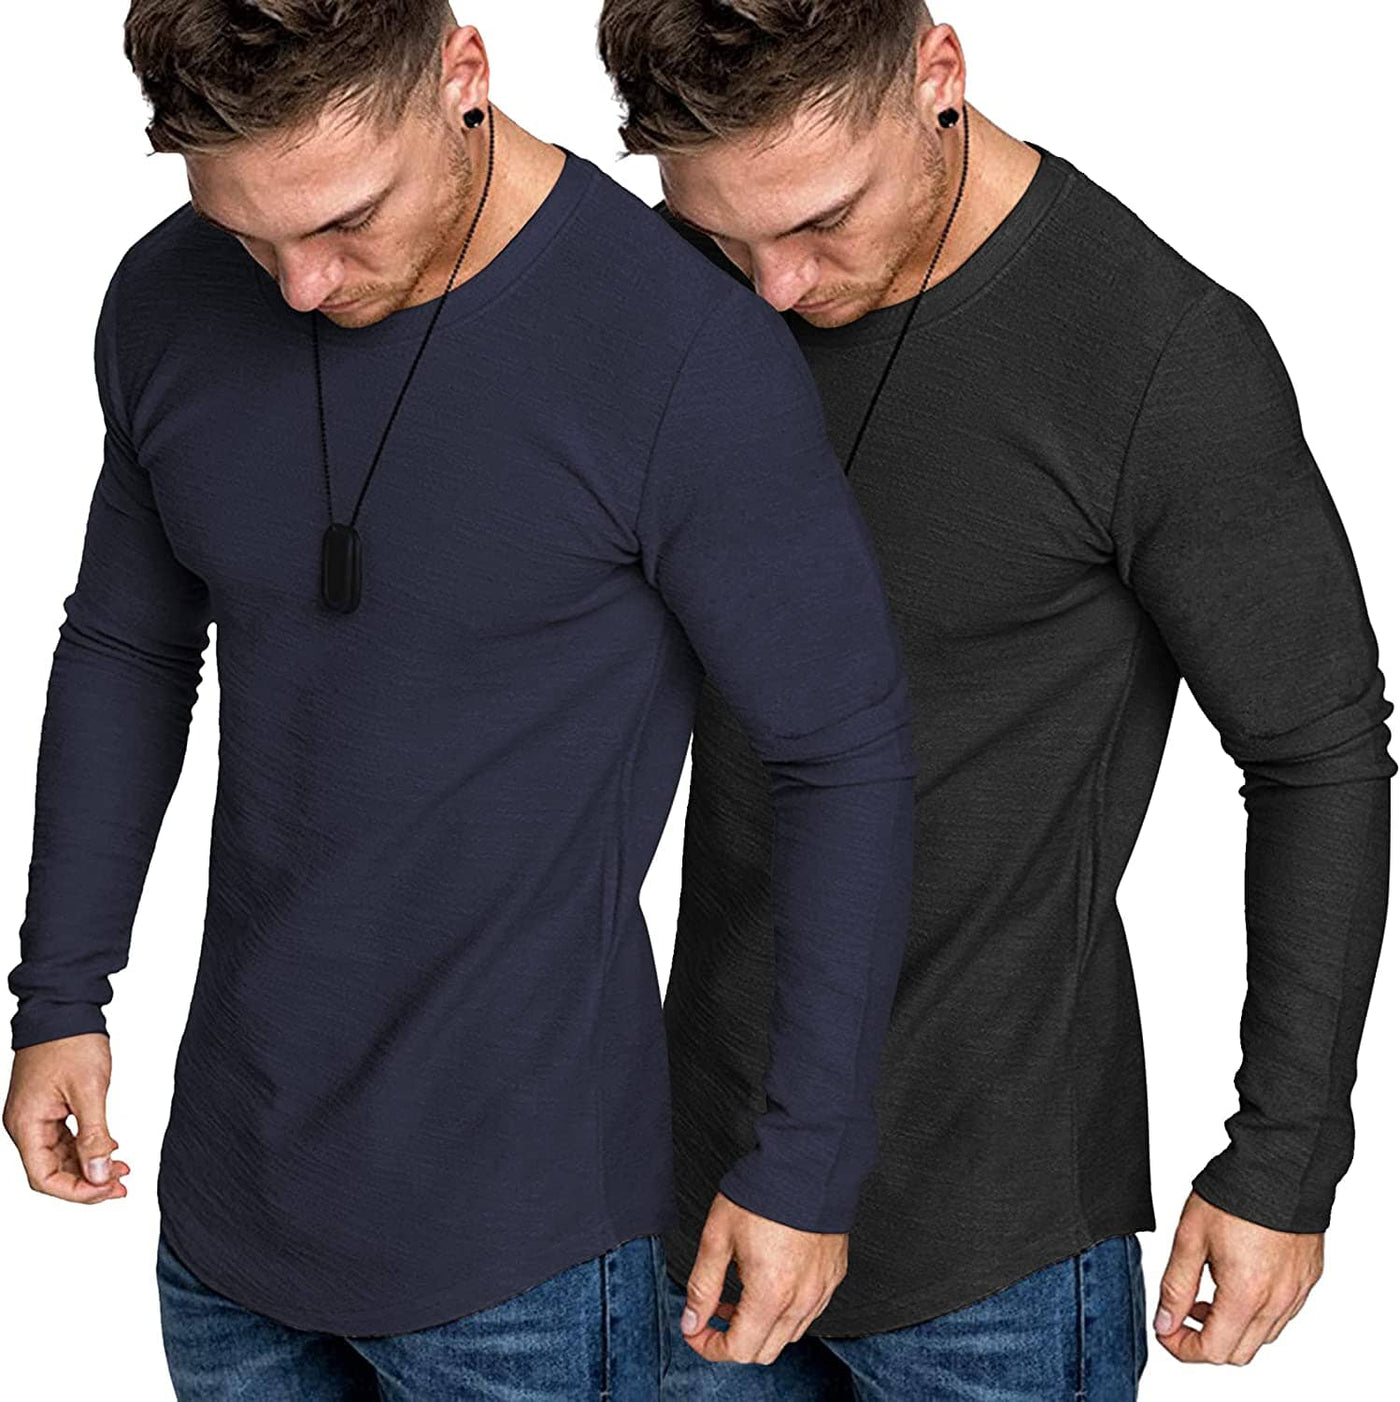 2-Pack Muscle Fitted Workout T-Shirt (US Only) T-Shirt COOFANDY Store Black/Navy Blue S 